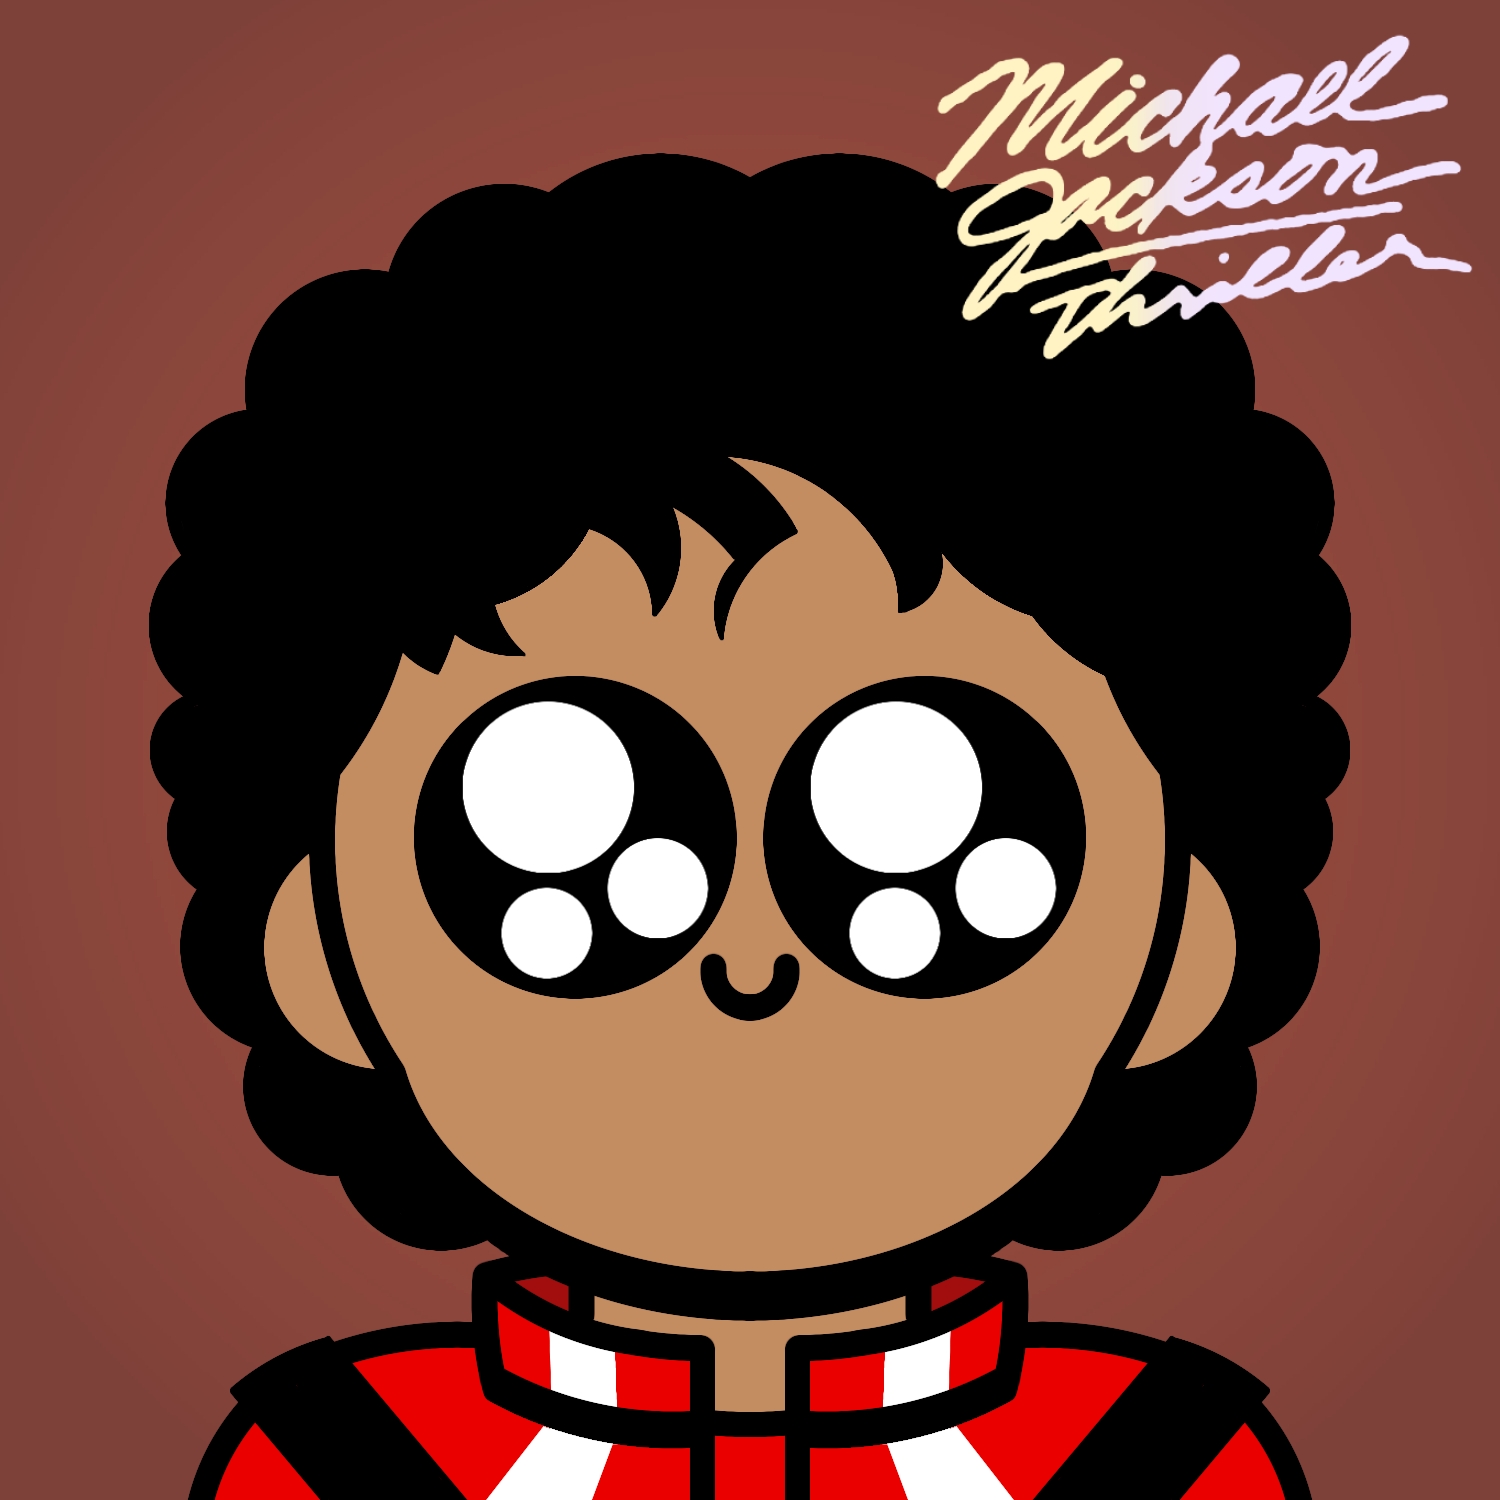 Thriller Album Cover But It’s In Cute Chibi Style